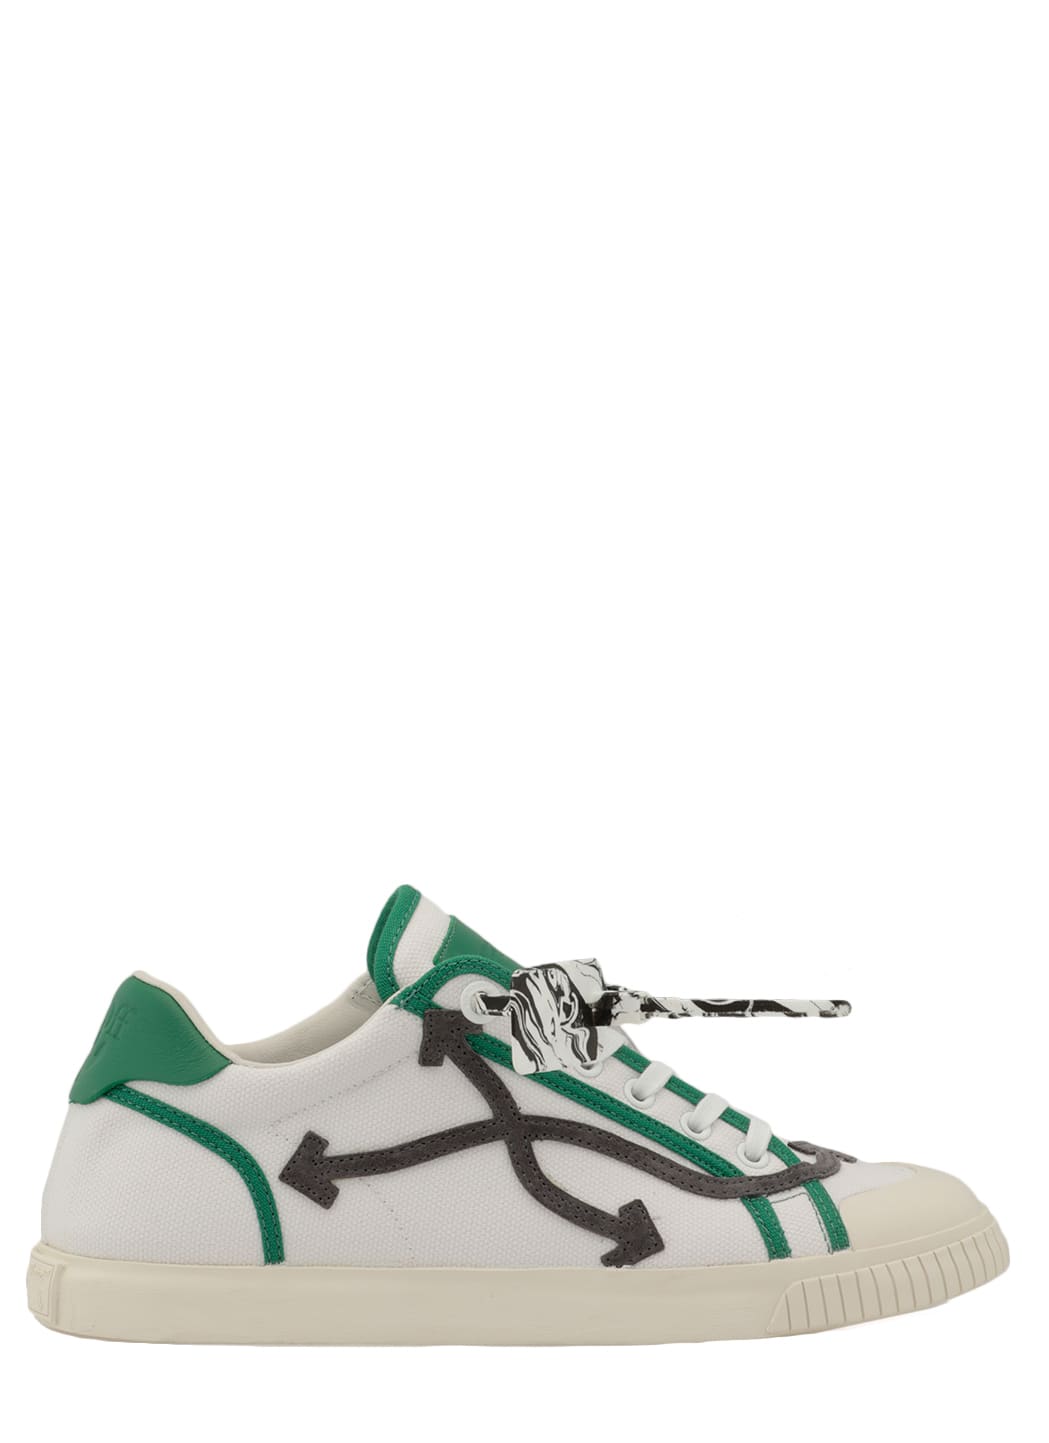 OFF-WHITE LEATHER AND FABRIC SNEAKER,OMIA213S21FAB001 VULCANIZED CANVAS0109